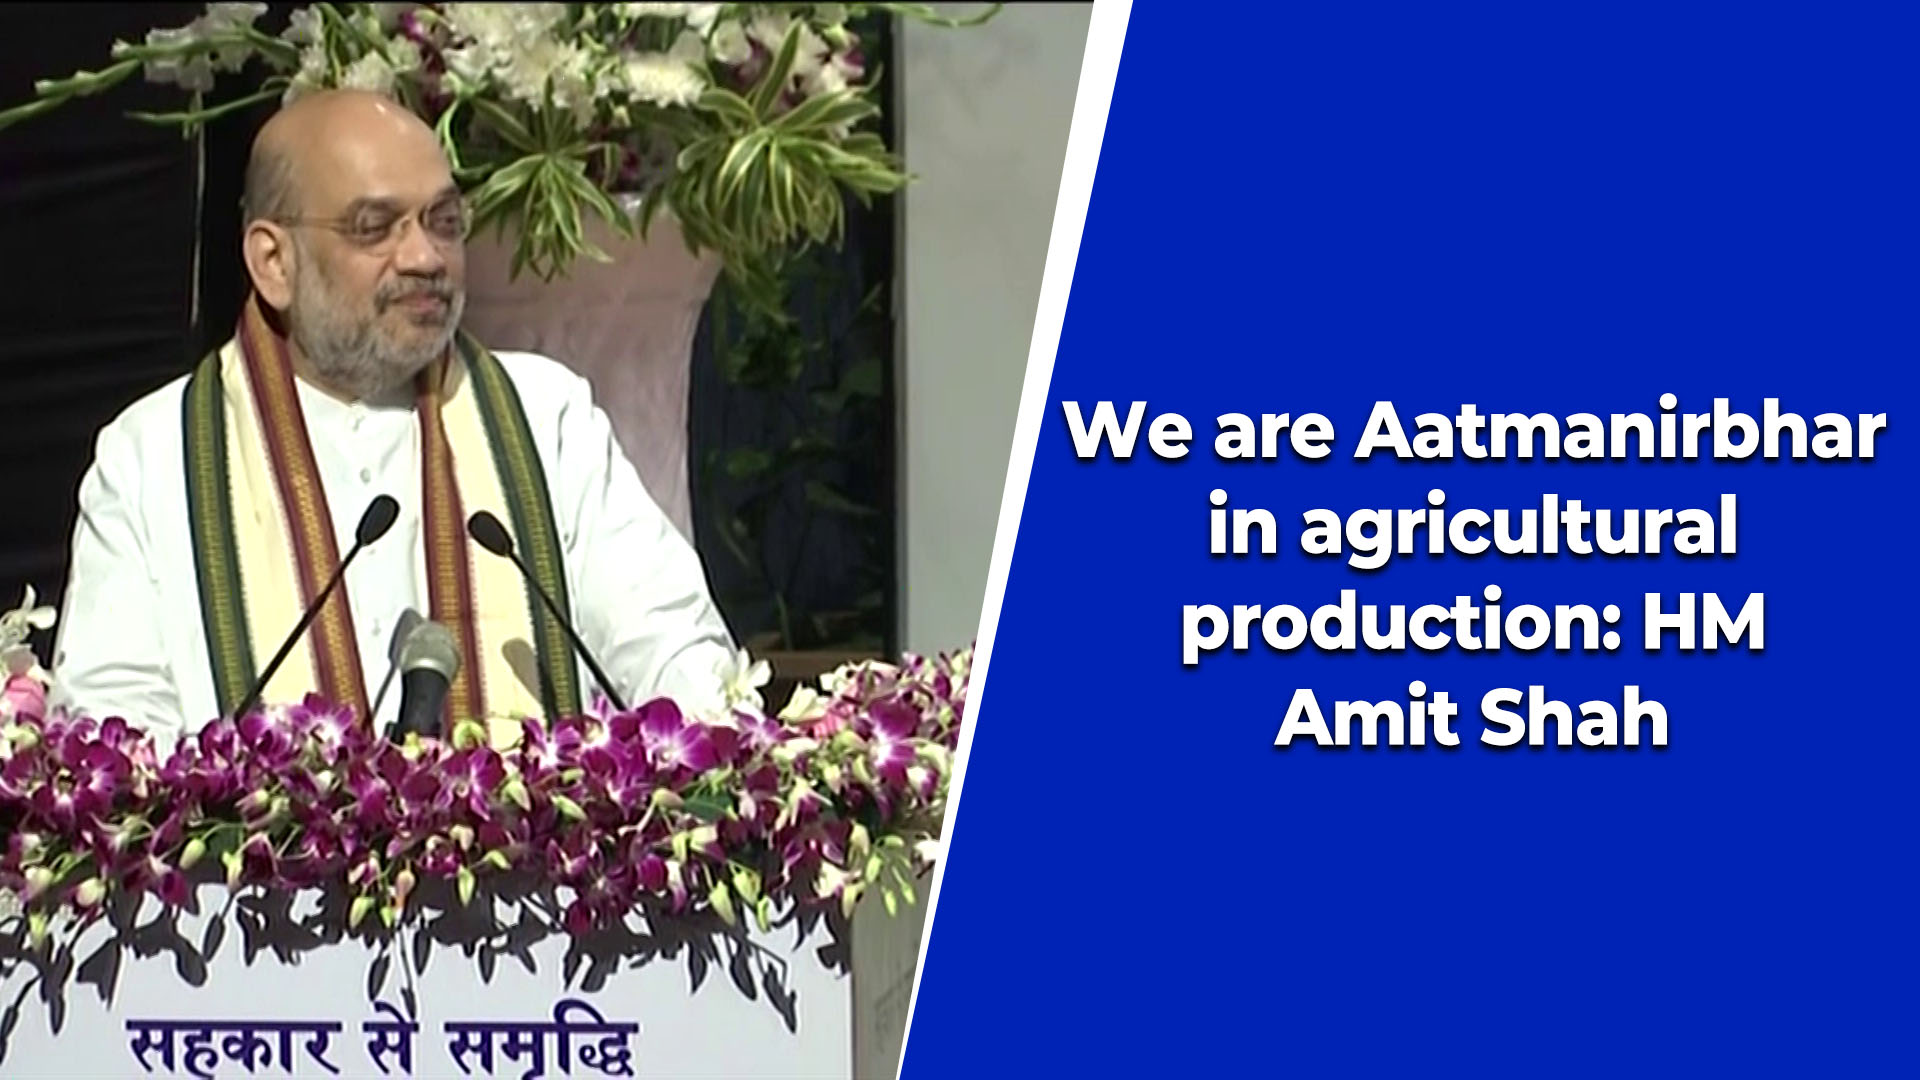 We are Aatmanirbhar in agricultural production: HM Amit Shah